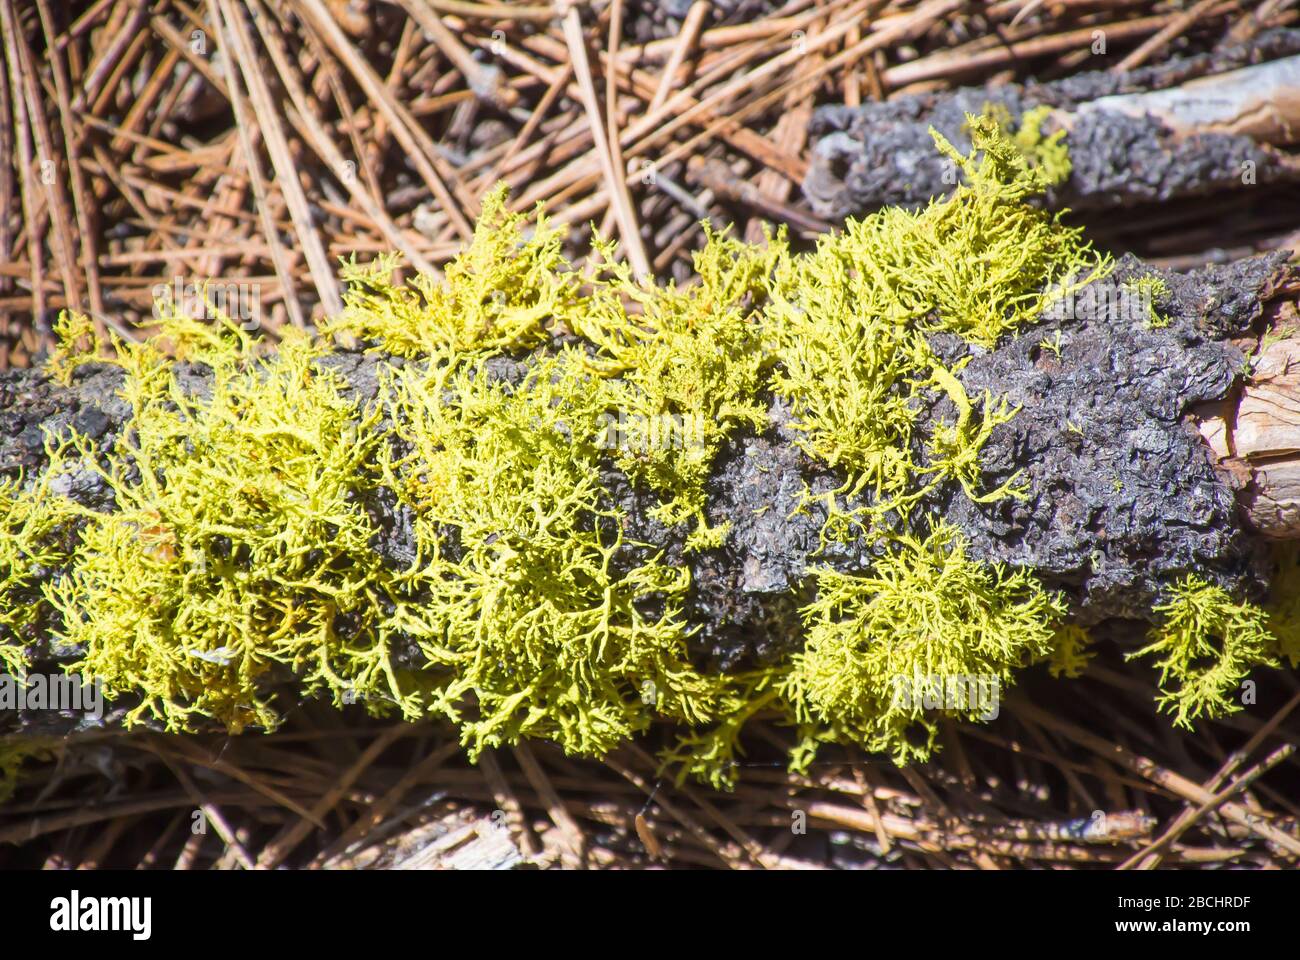 Lichen Growing on Log Found on the Forest Ground Floor Stock Photo